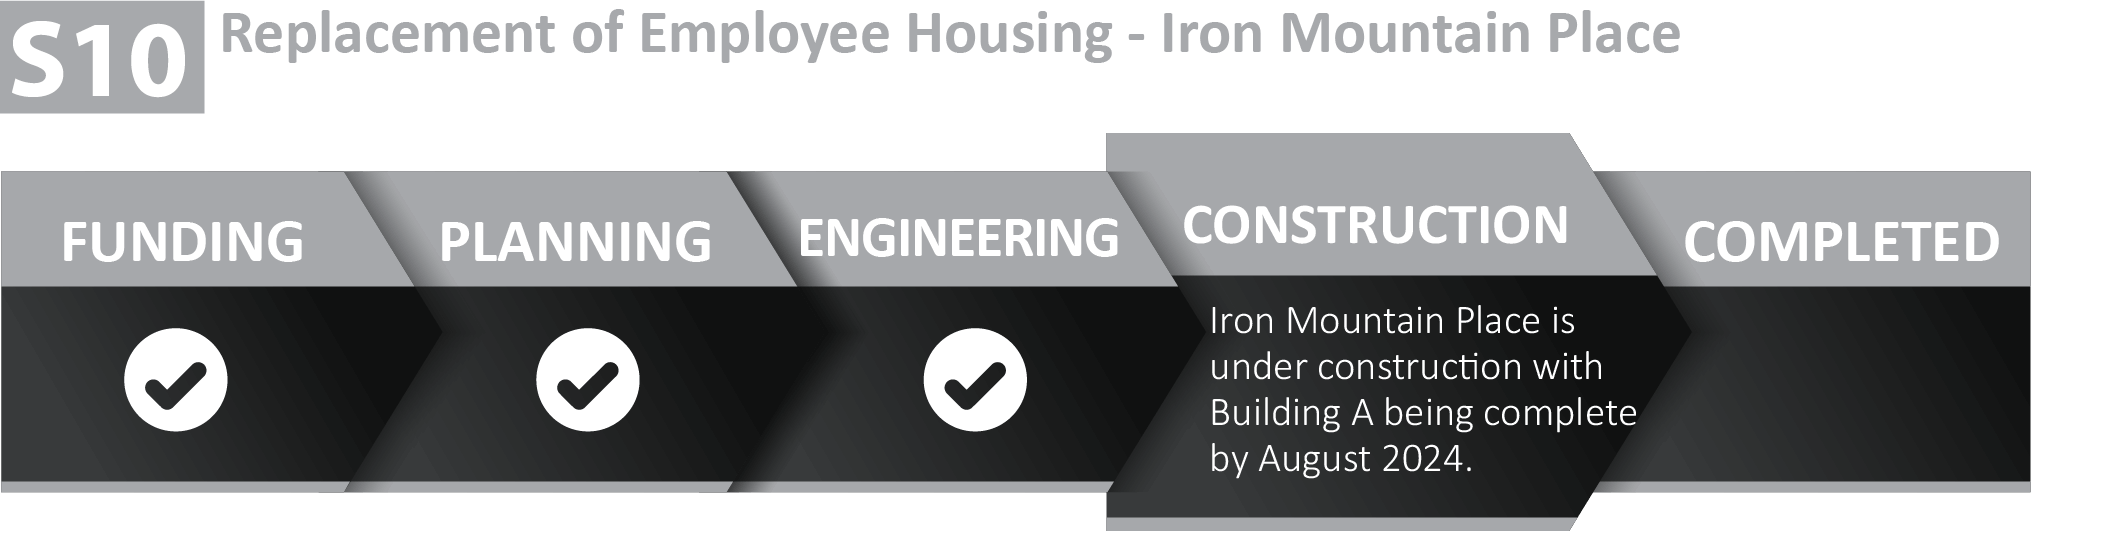 Graphic showing Iron Mountain Place employee housing is 
under construction with 
Building A being complete by August 2024.